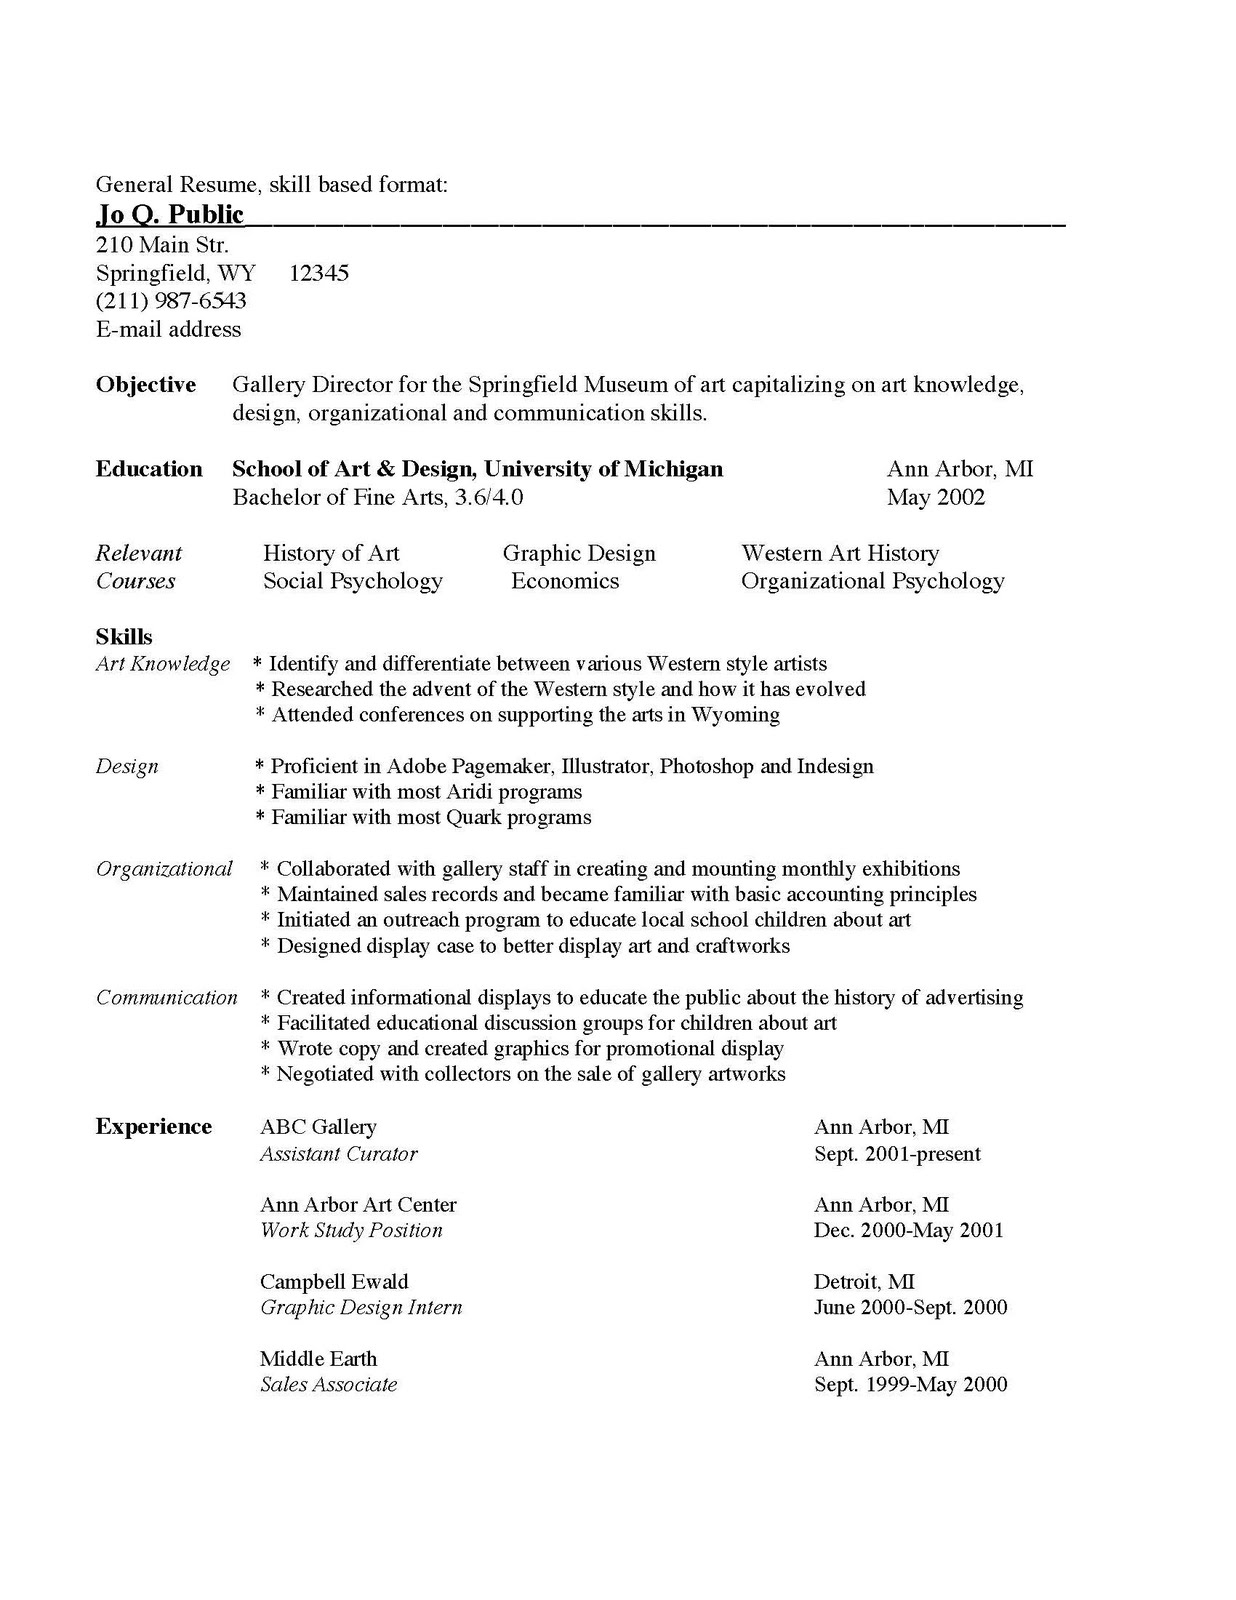 High Quality Custom Essays Favorable Pricing Policy Sample Resume